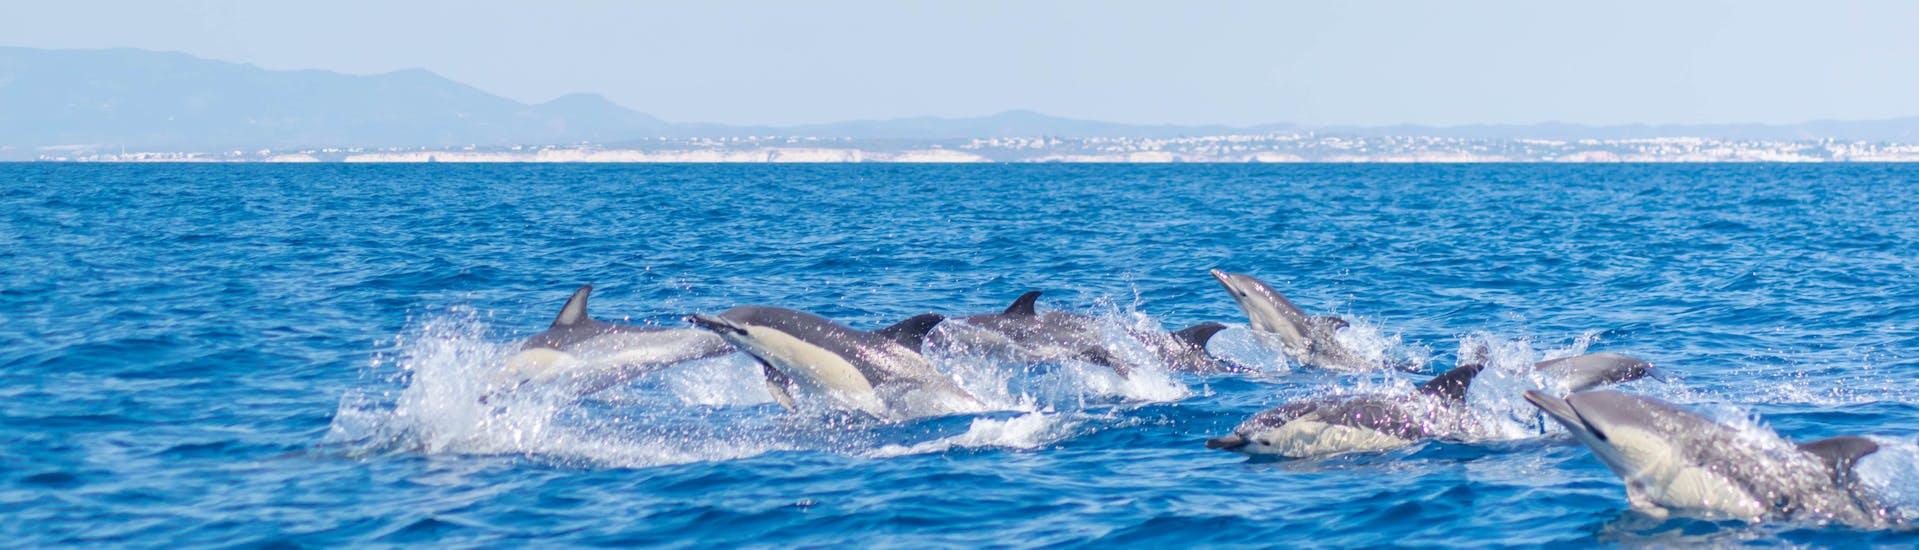 Dolphins jumping out of the water during the Boat trip for watching Dolphins in Algarve organized by 5EmotionsAlgarve